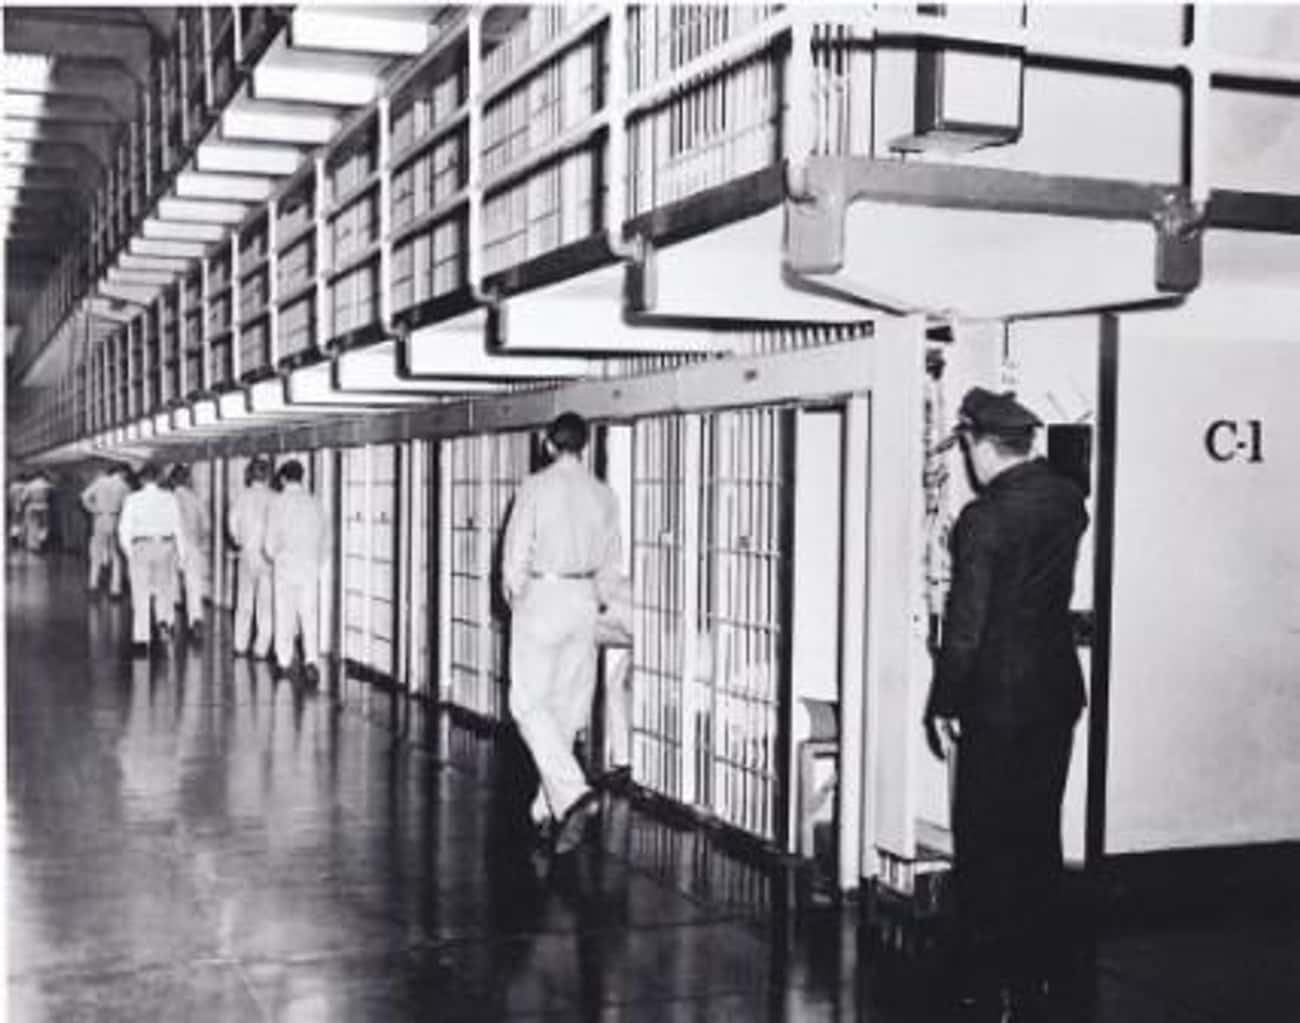 Prisoners Were Counted Several Times A Day